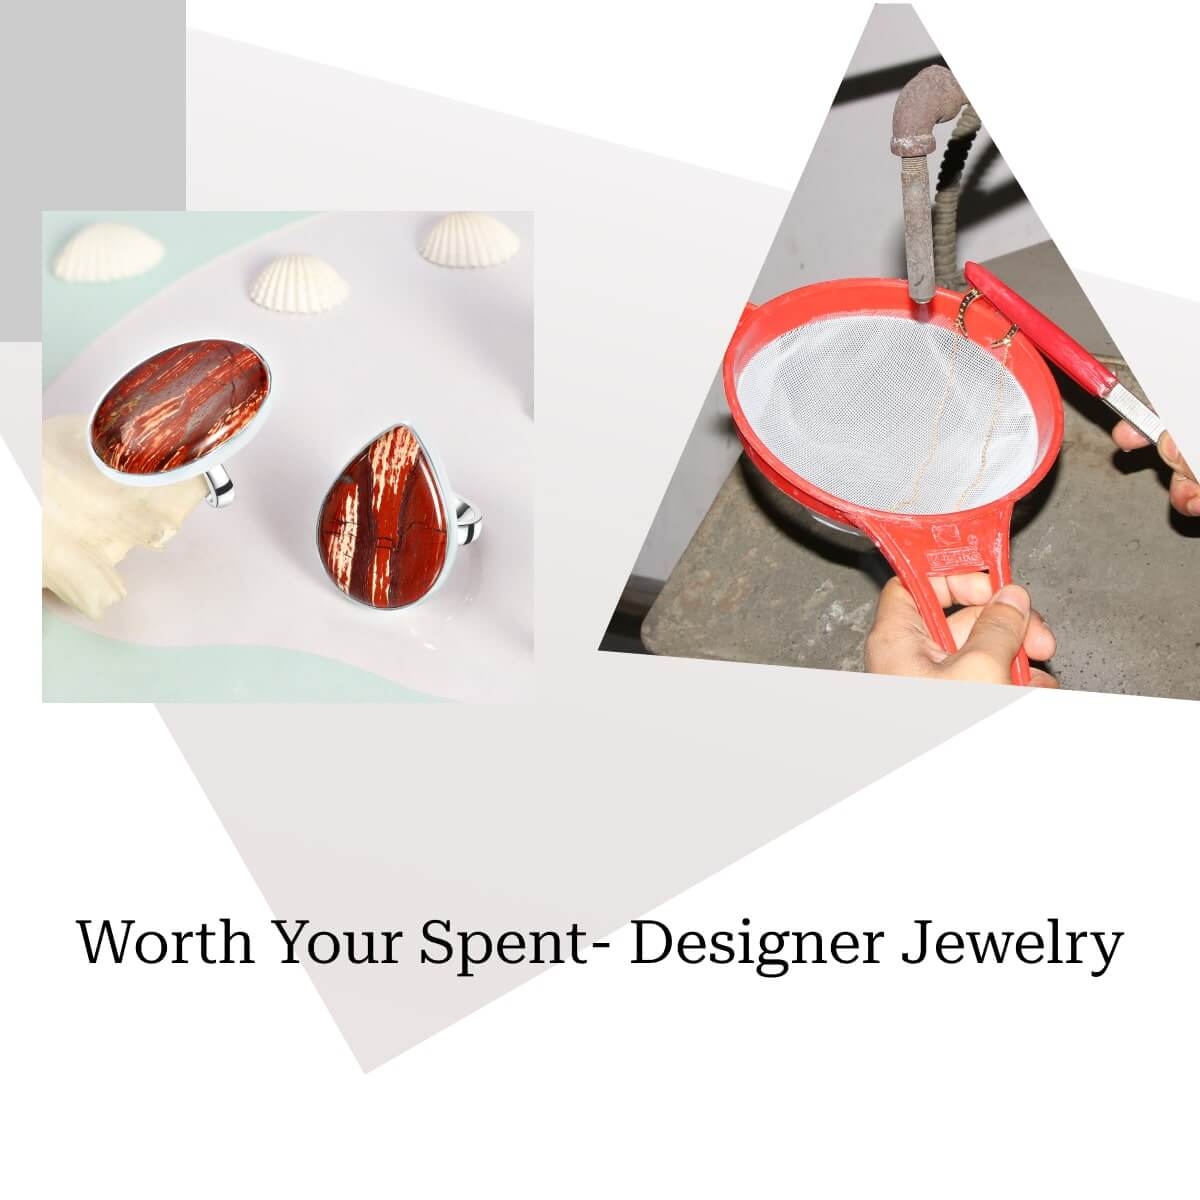 Why should you Buy Designer Jewelry